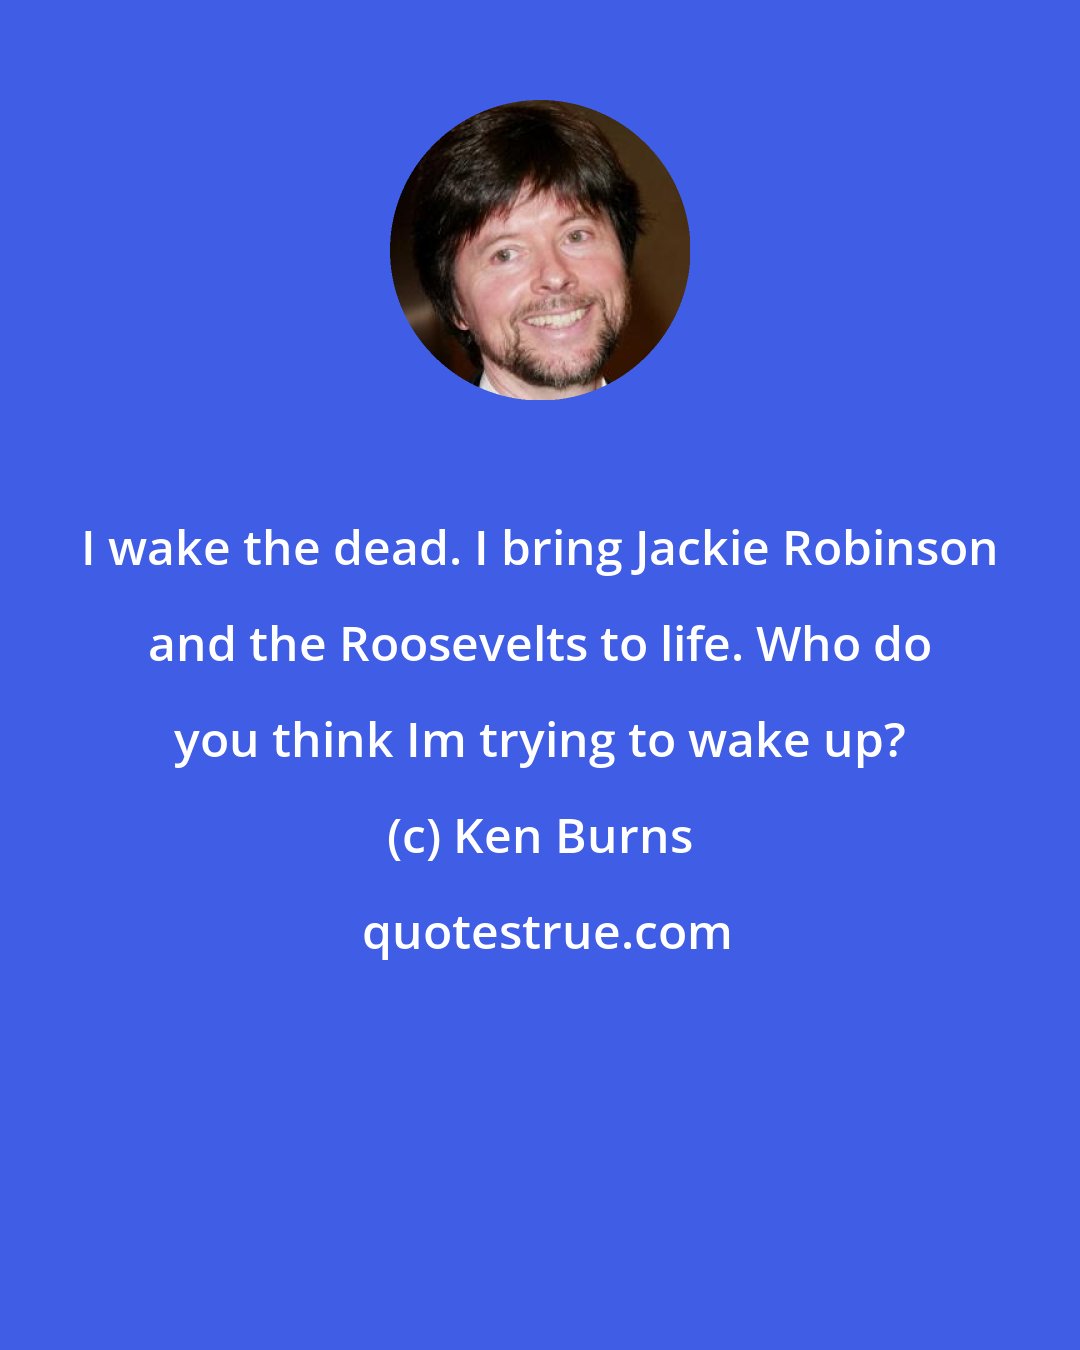 Ken Burns: I wake the dead. I bring Jackie Robinson and the Roosevelts to life. Who do you think Im trying to wake up?